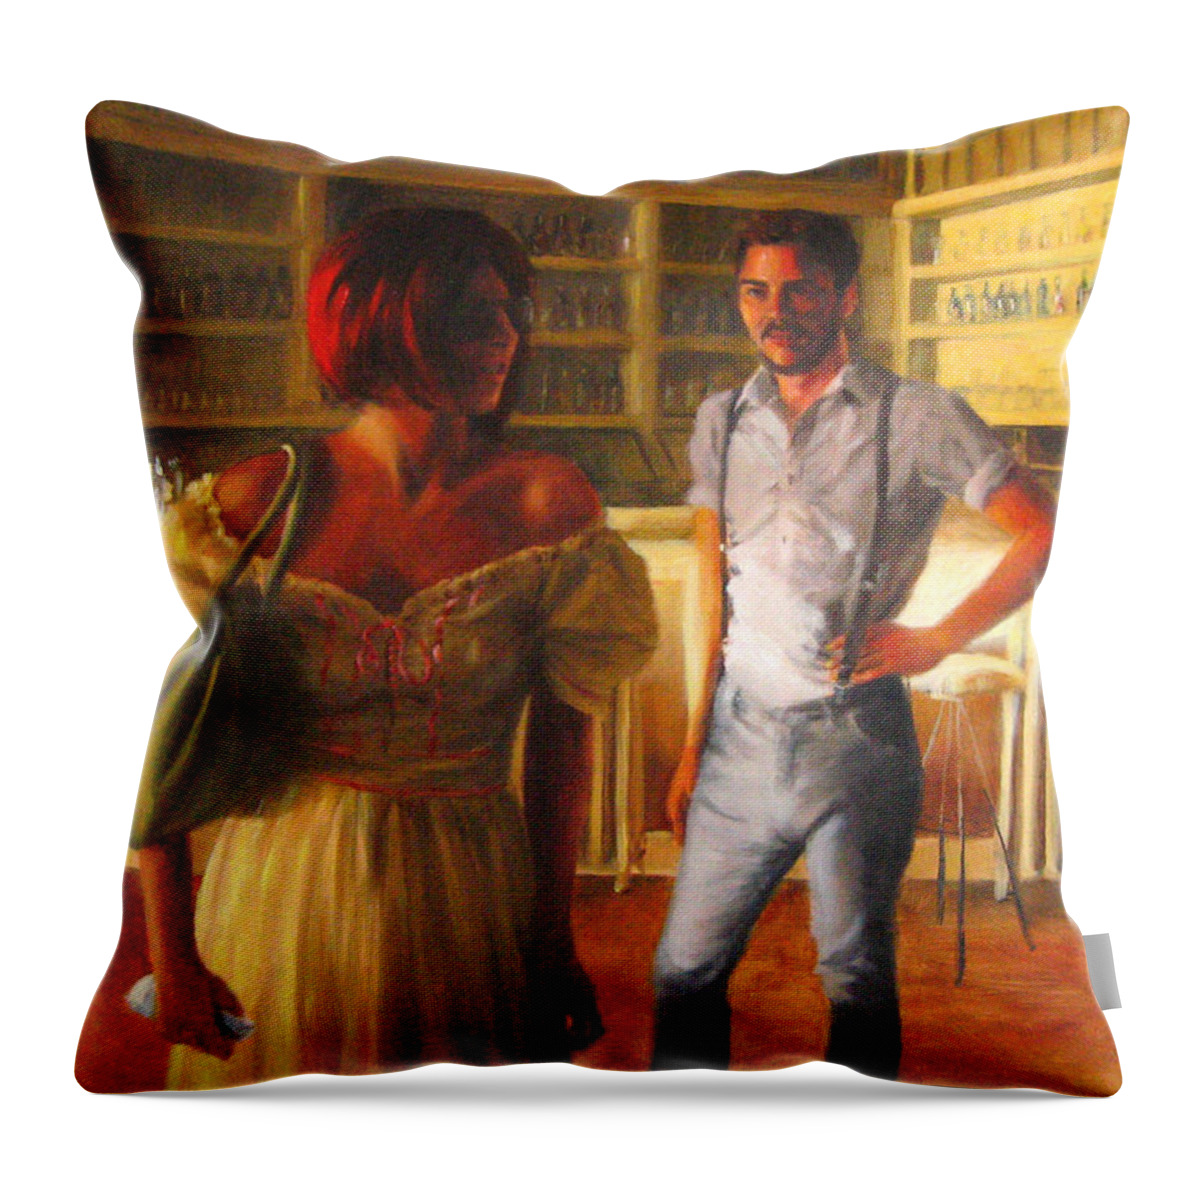 Bar Throw Pillow featuring the painting Swans' Focus by Connie Schaertl